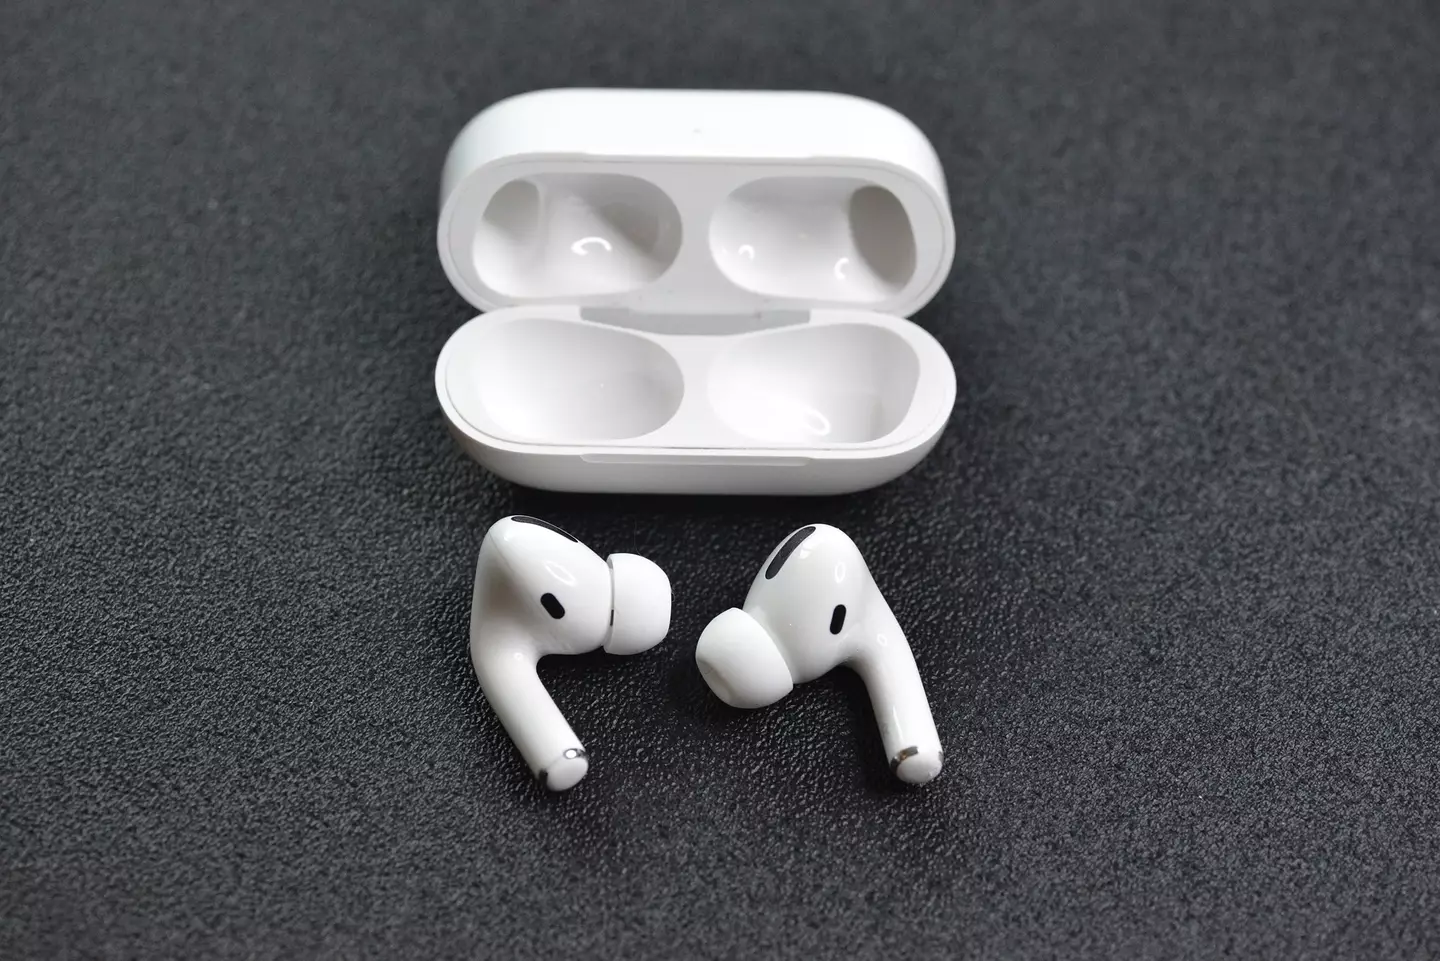 A woman was unfortunately separated from her AirPods while flying.